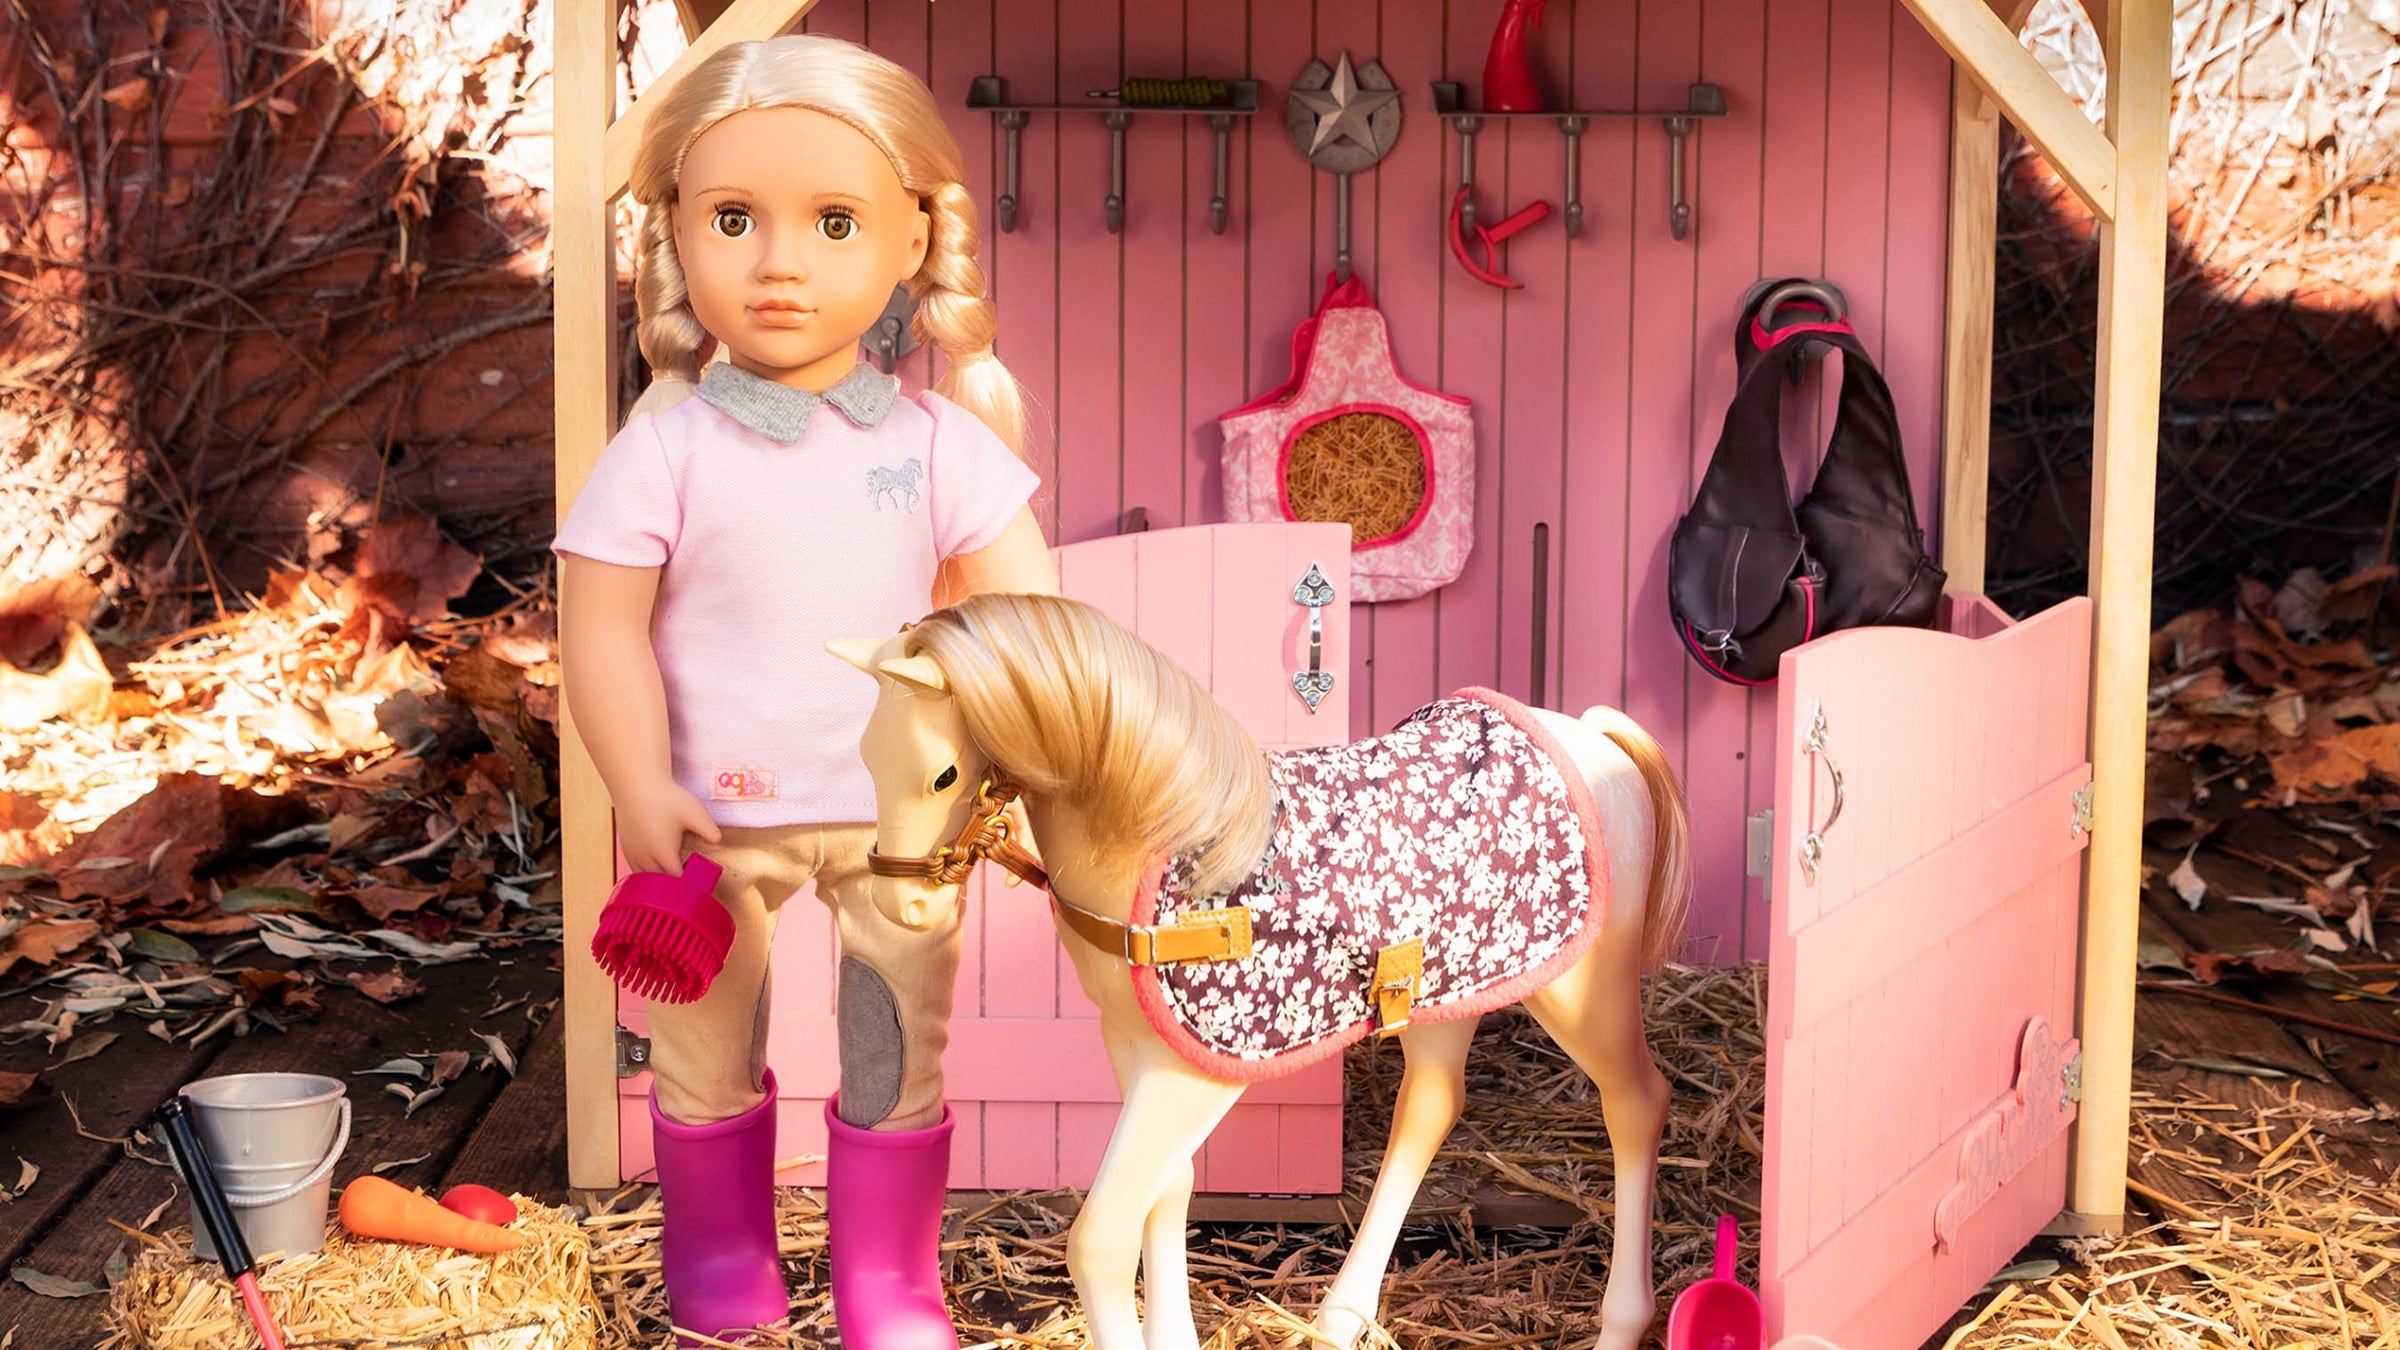 Equestrian - OG Horse-Riding Doll, Equestrian Doll Clothes & Horse-Riding Accessories - Our Generation